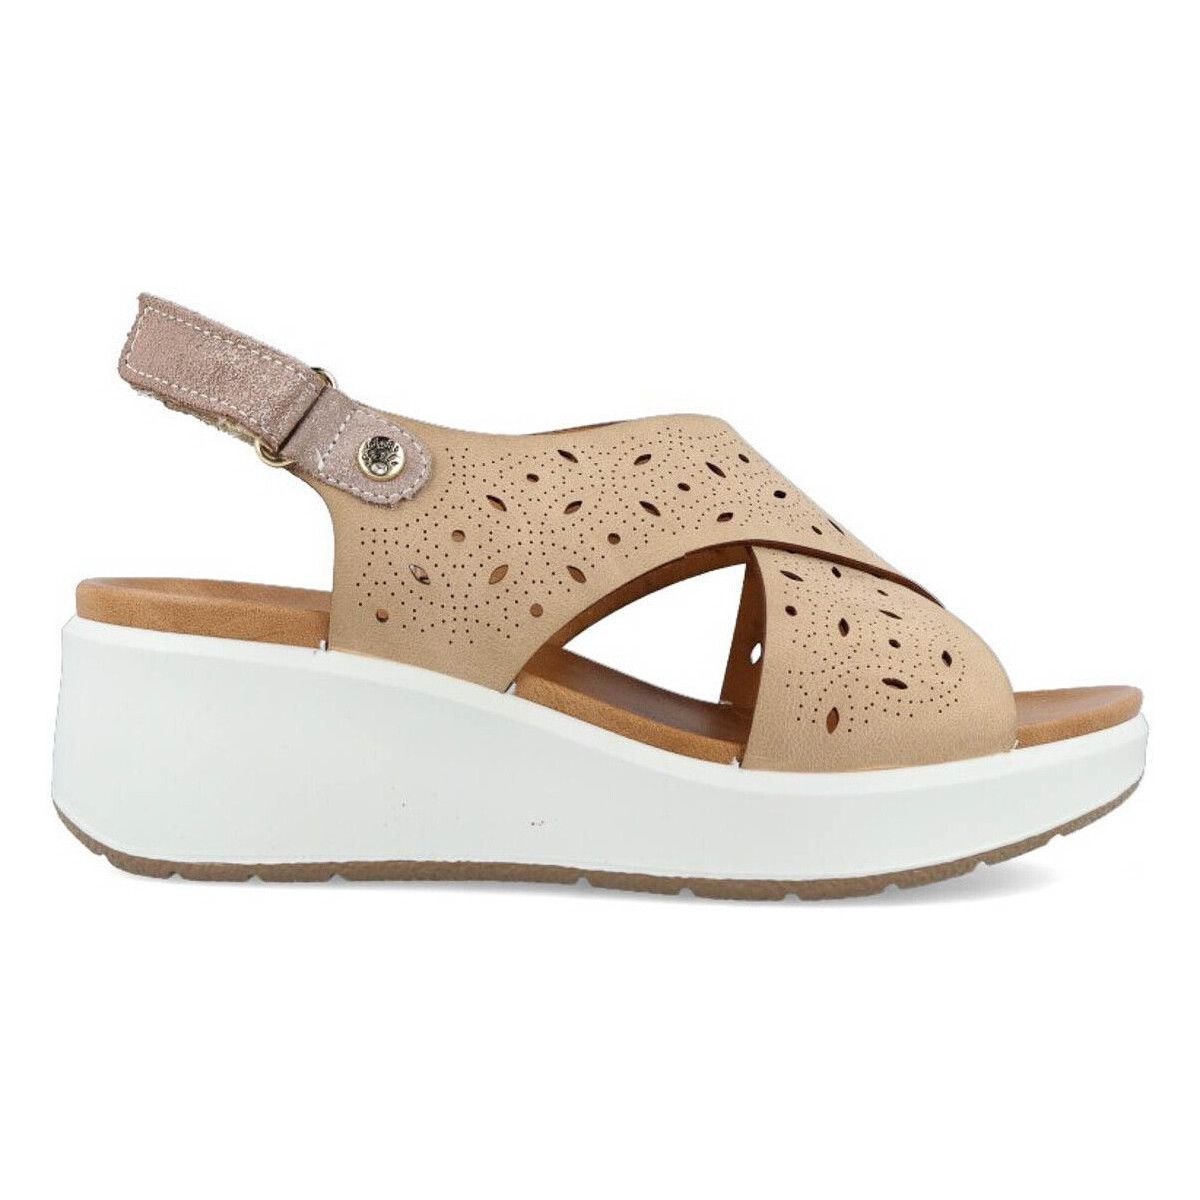 Chaussures Femme Oh My Sandals 357570 Beige